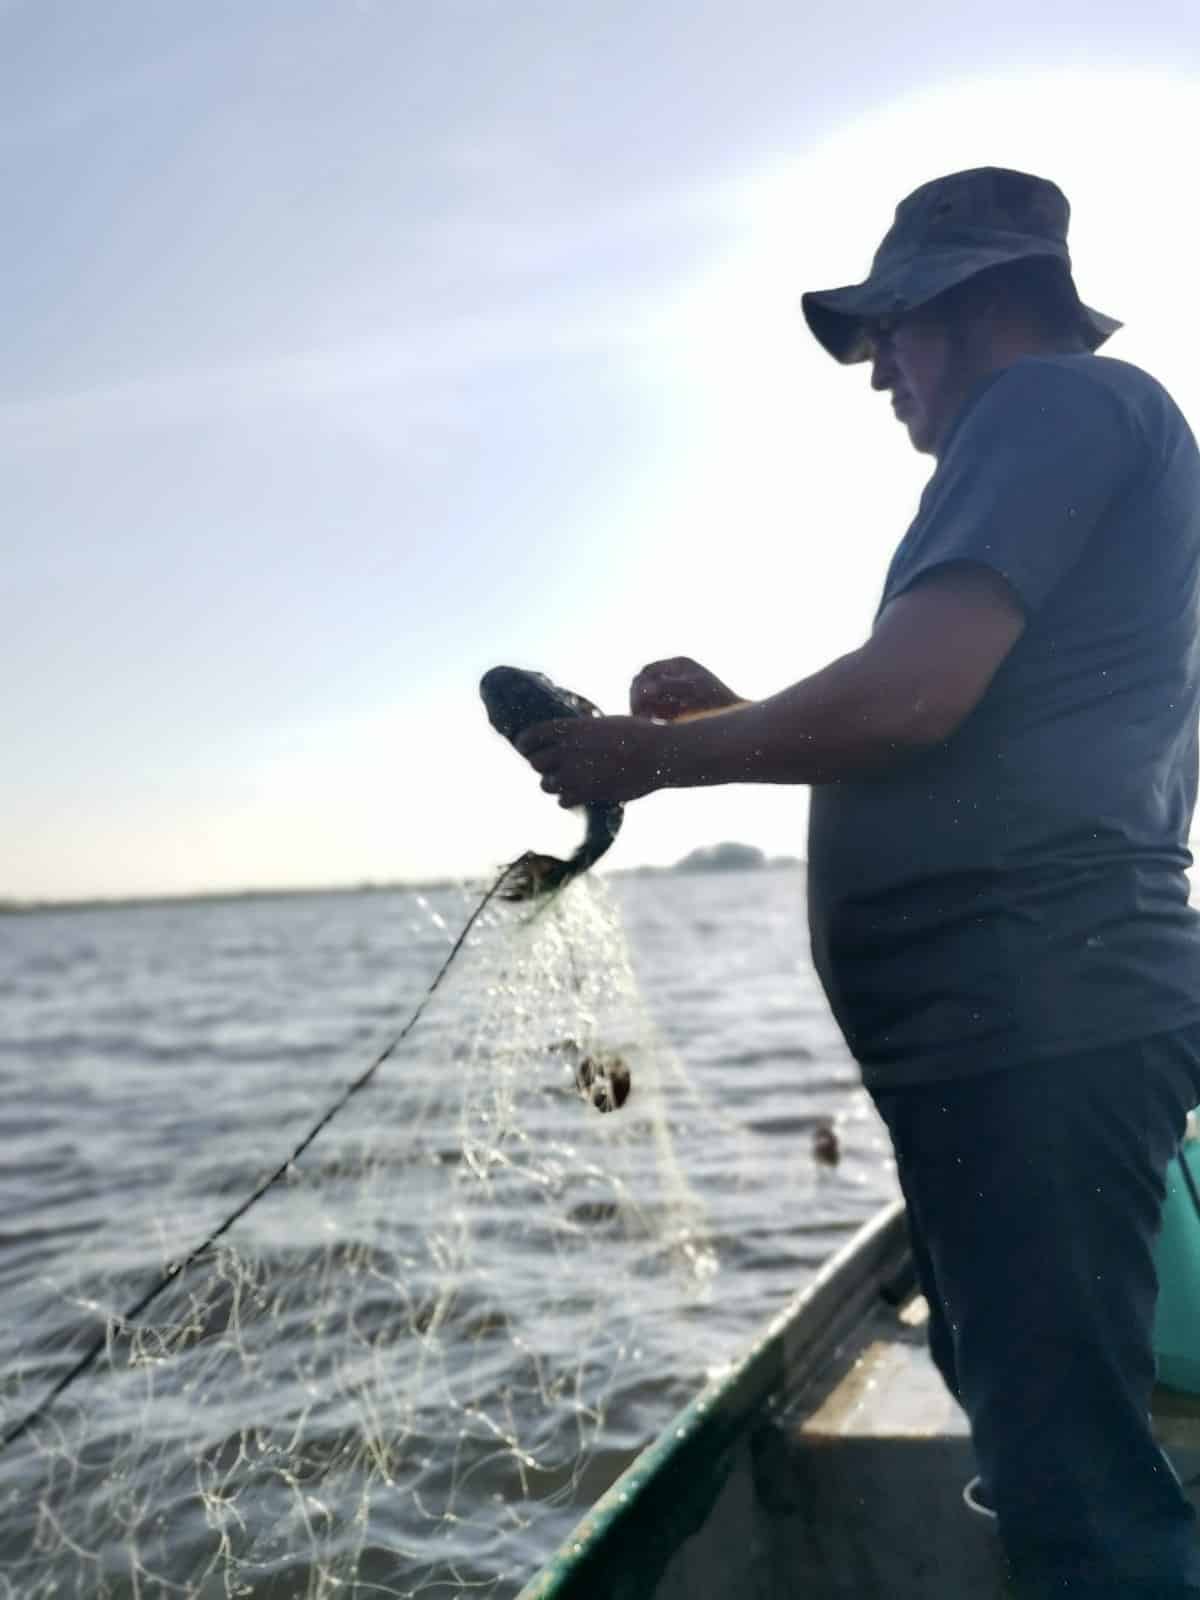 A fisherman is in the process of capturing an armoured catfish using nets in Tabasco, Mexico. Photo: Sara Escobar, Tortugas al Viento.